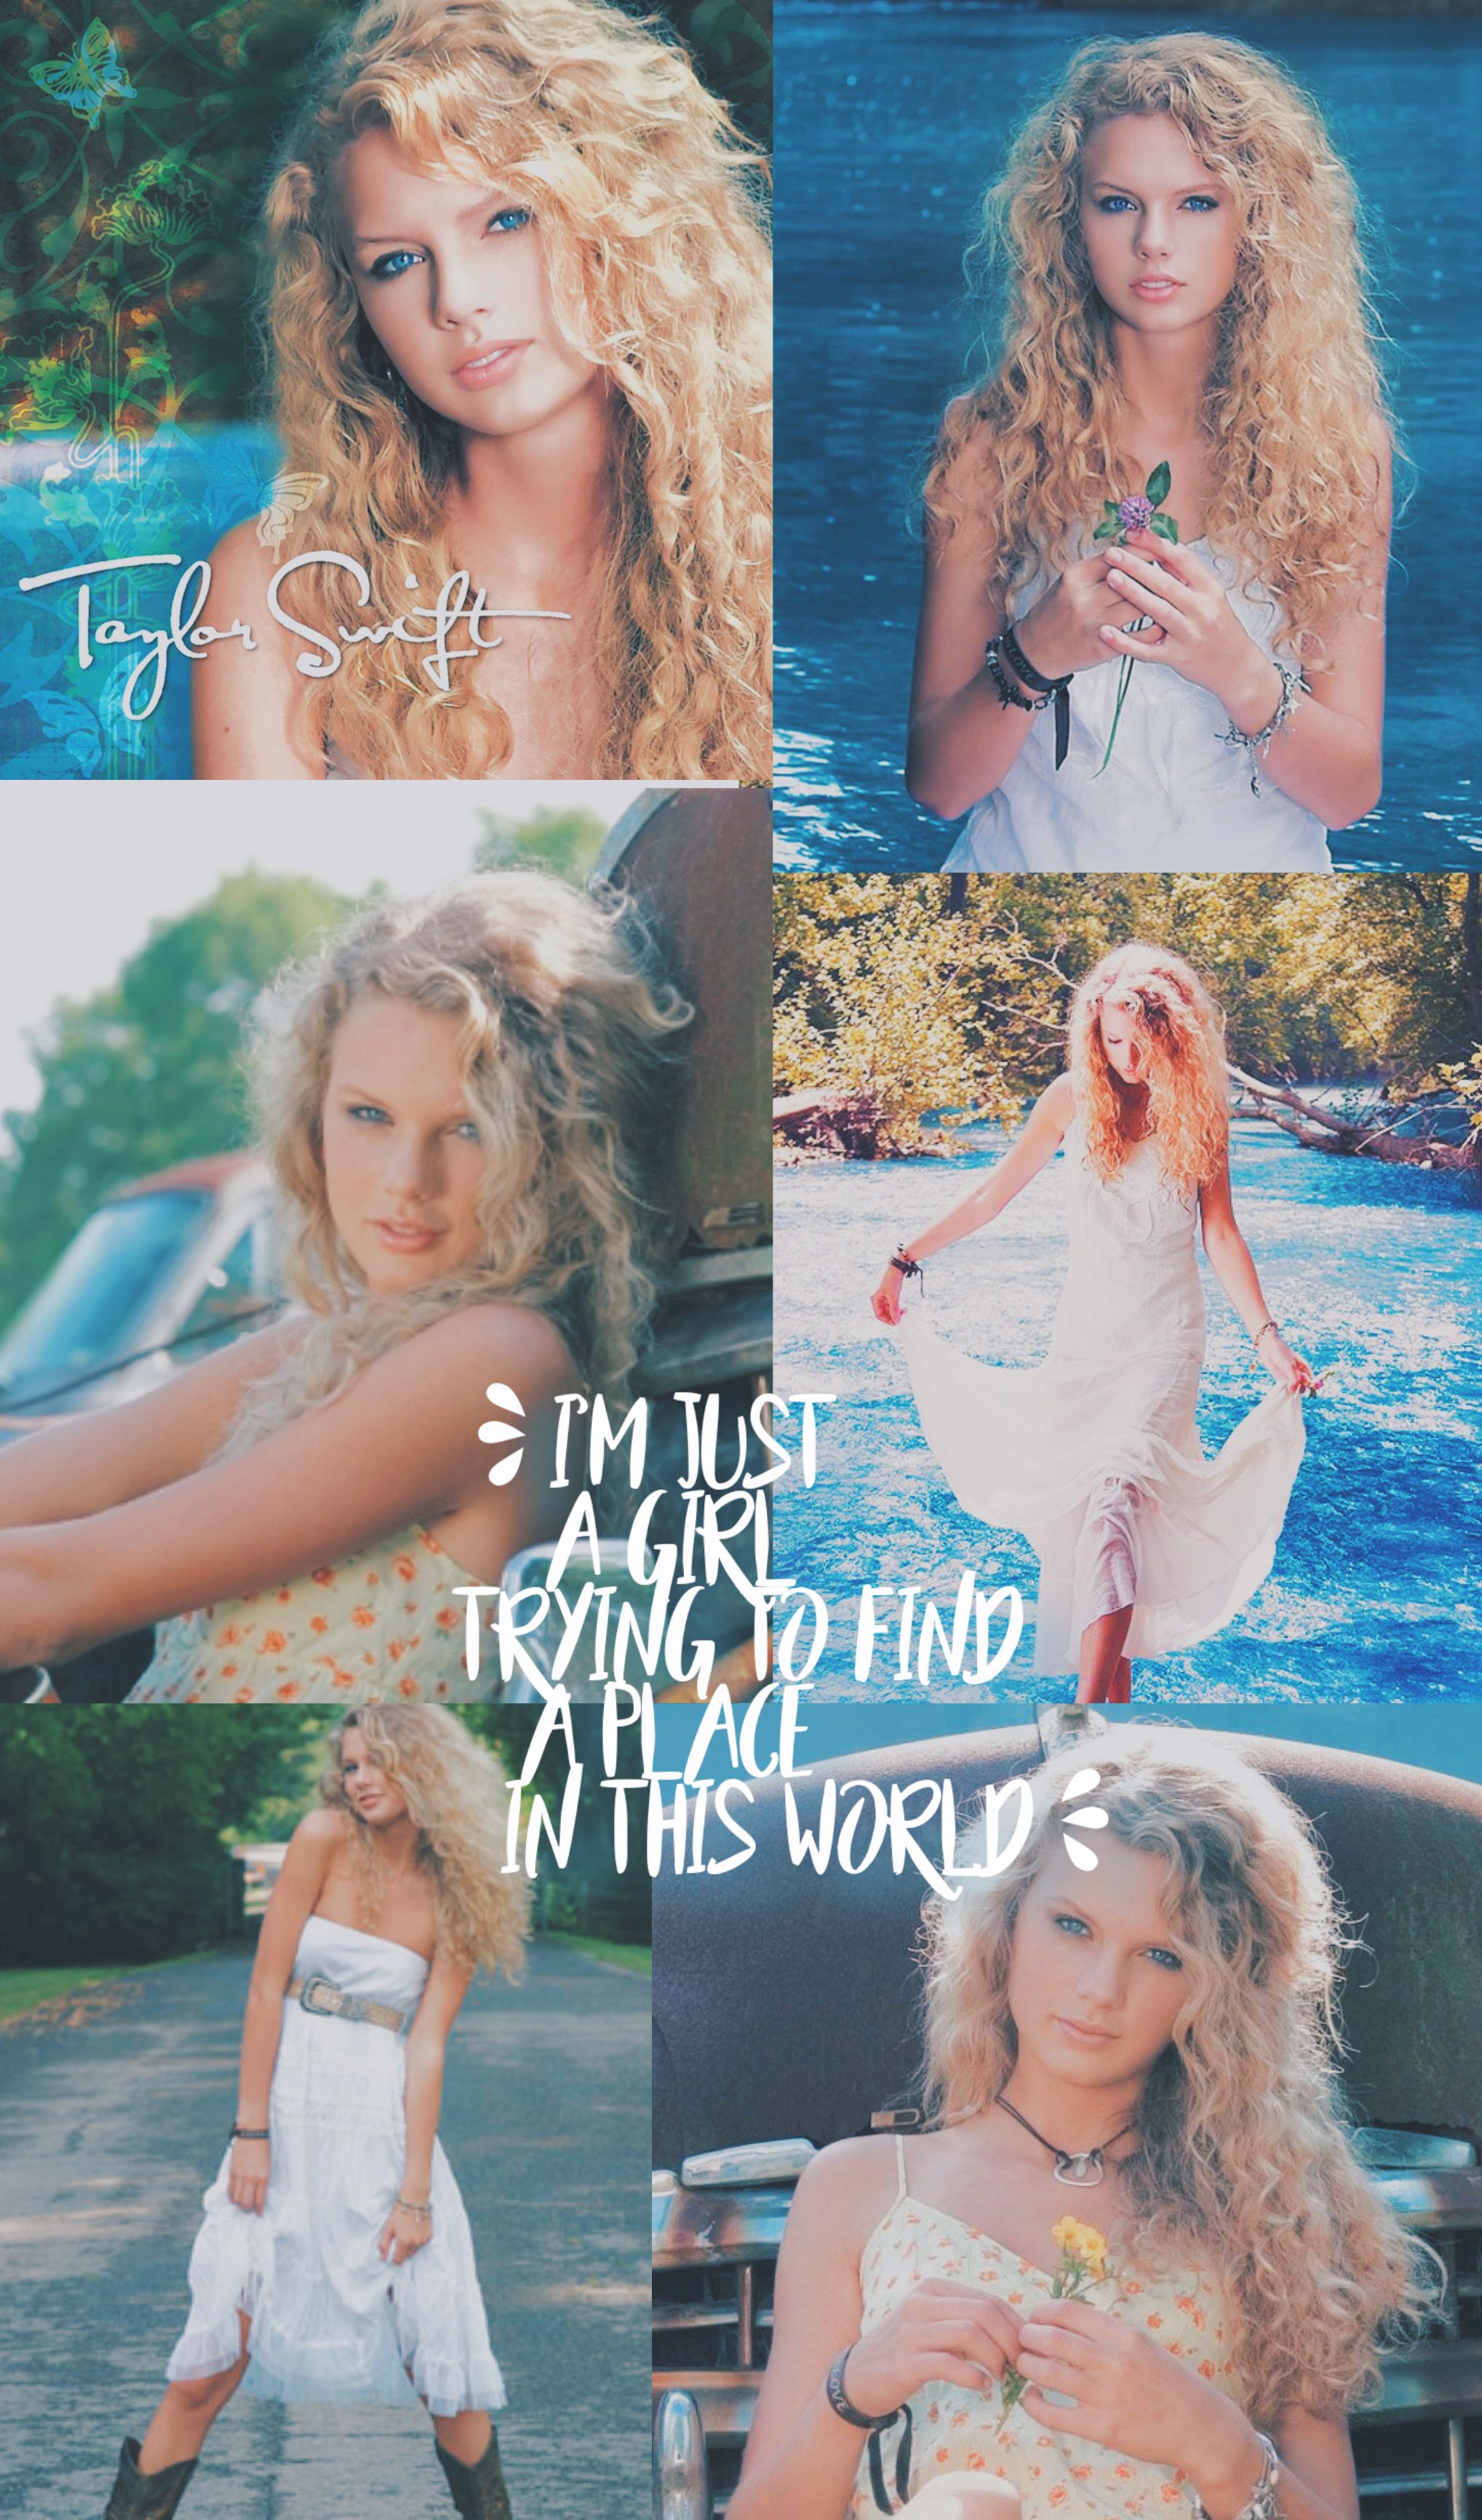 Taylor Swift Debut Album Aesthetic. Taylor swift first album, Taylor swift debut album, Taylor swift picture